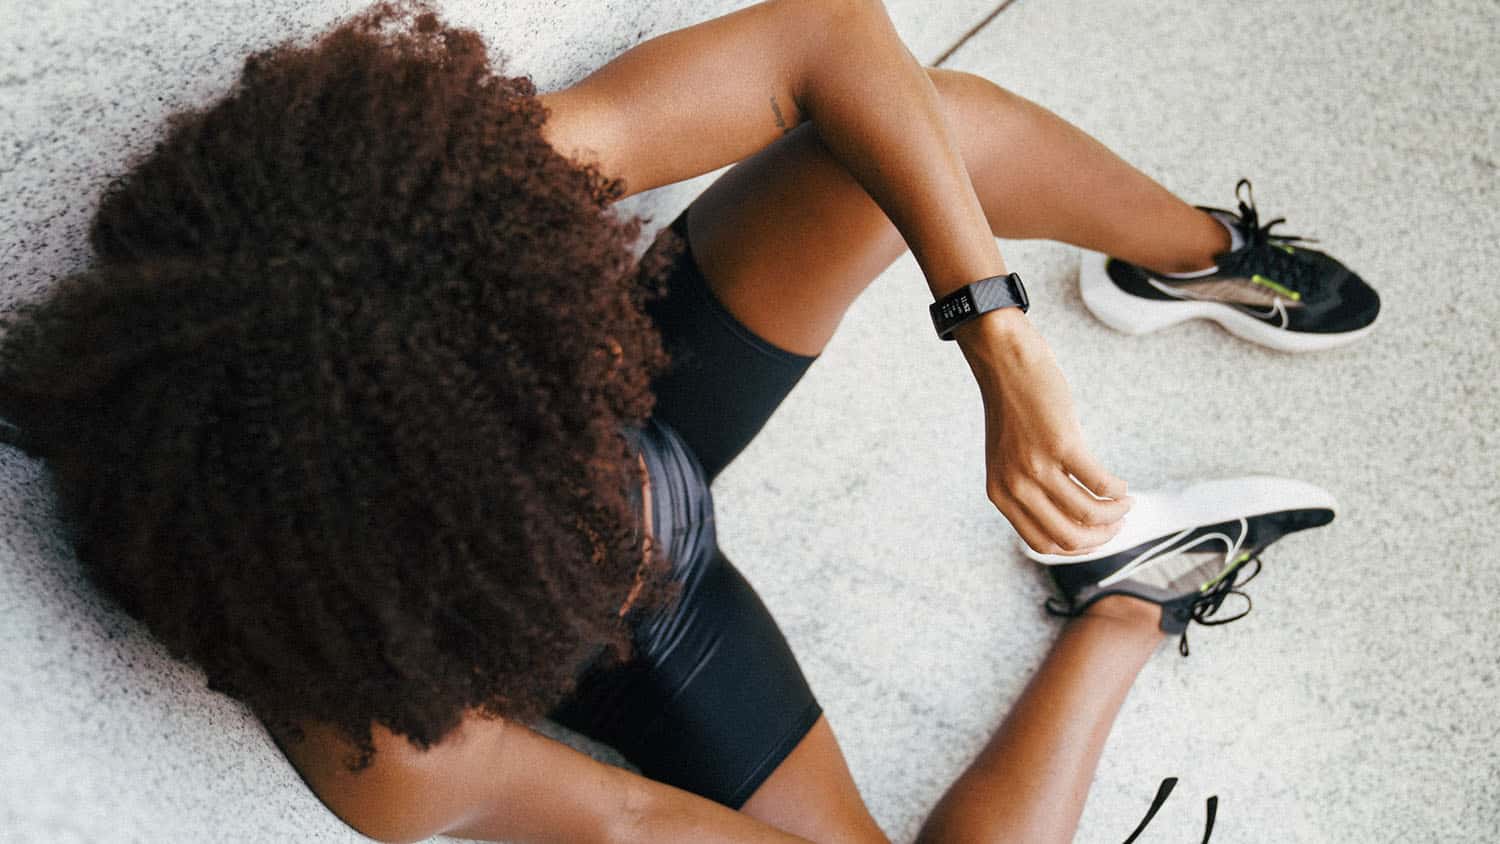 photo taken from above shows a Black woman in exercise clothes looking at a health monitor on her wrist